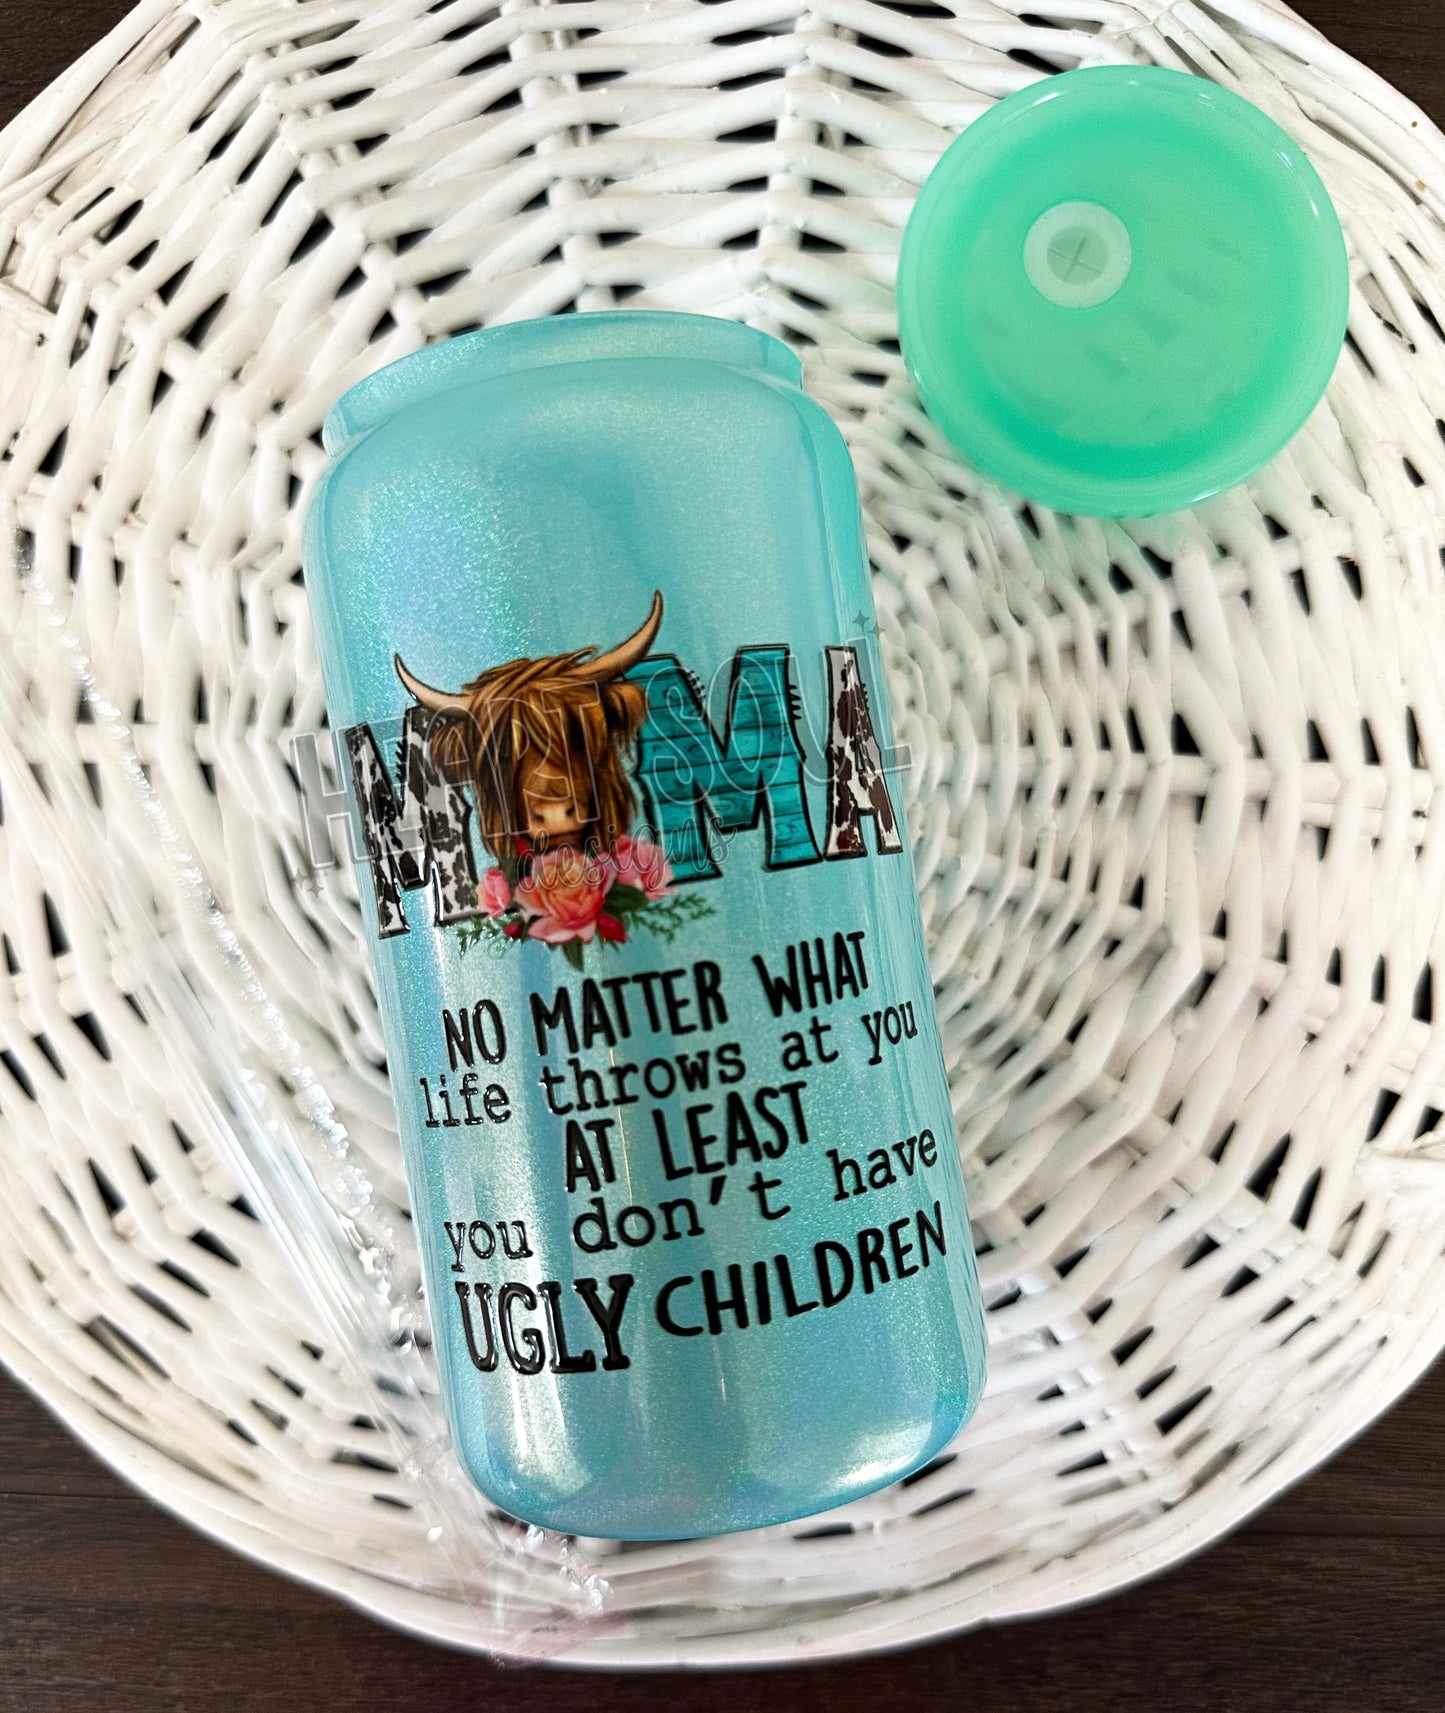 At least you don’t have ugly children shimmer glass cup/mint